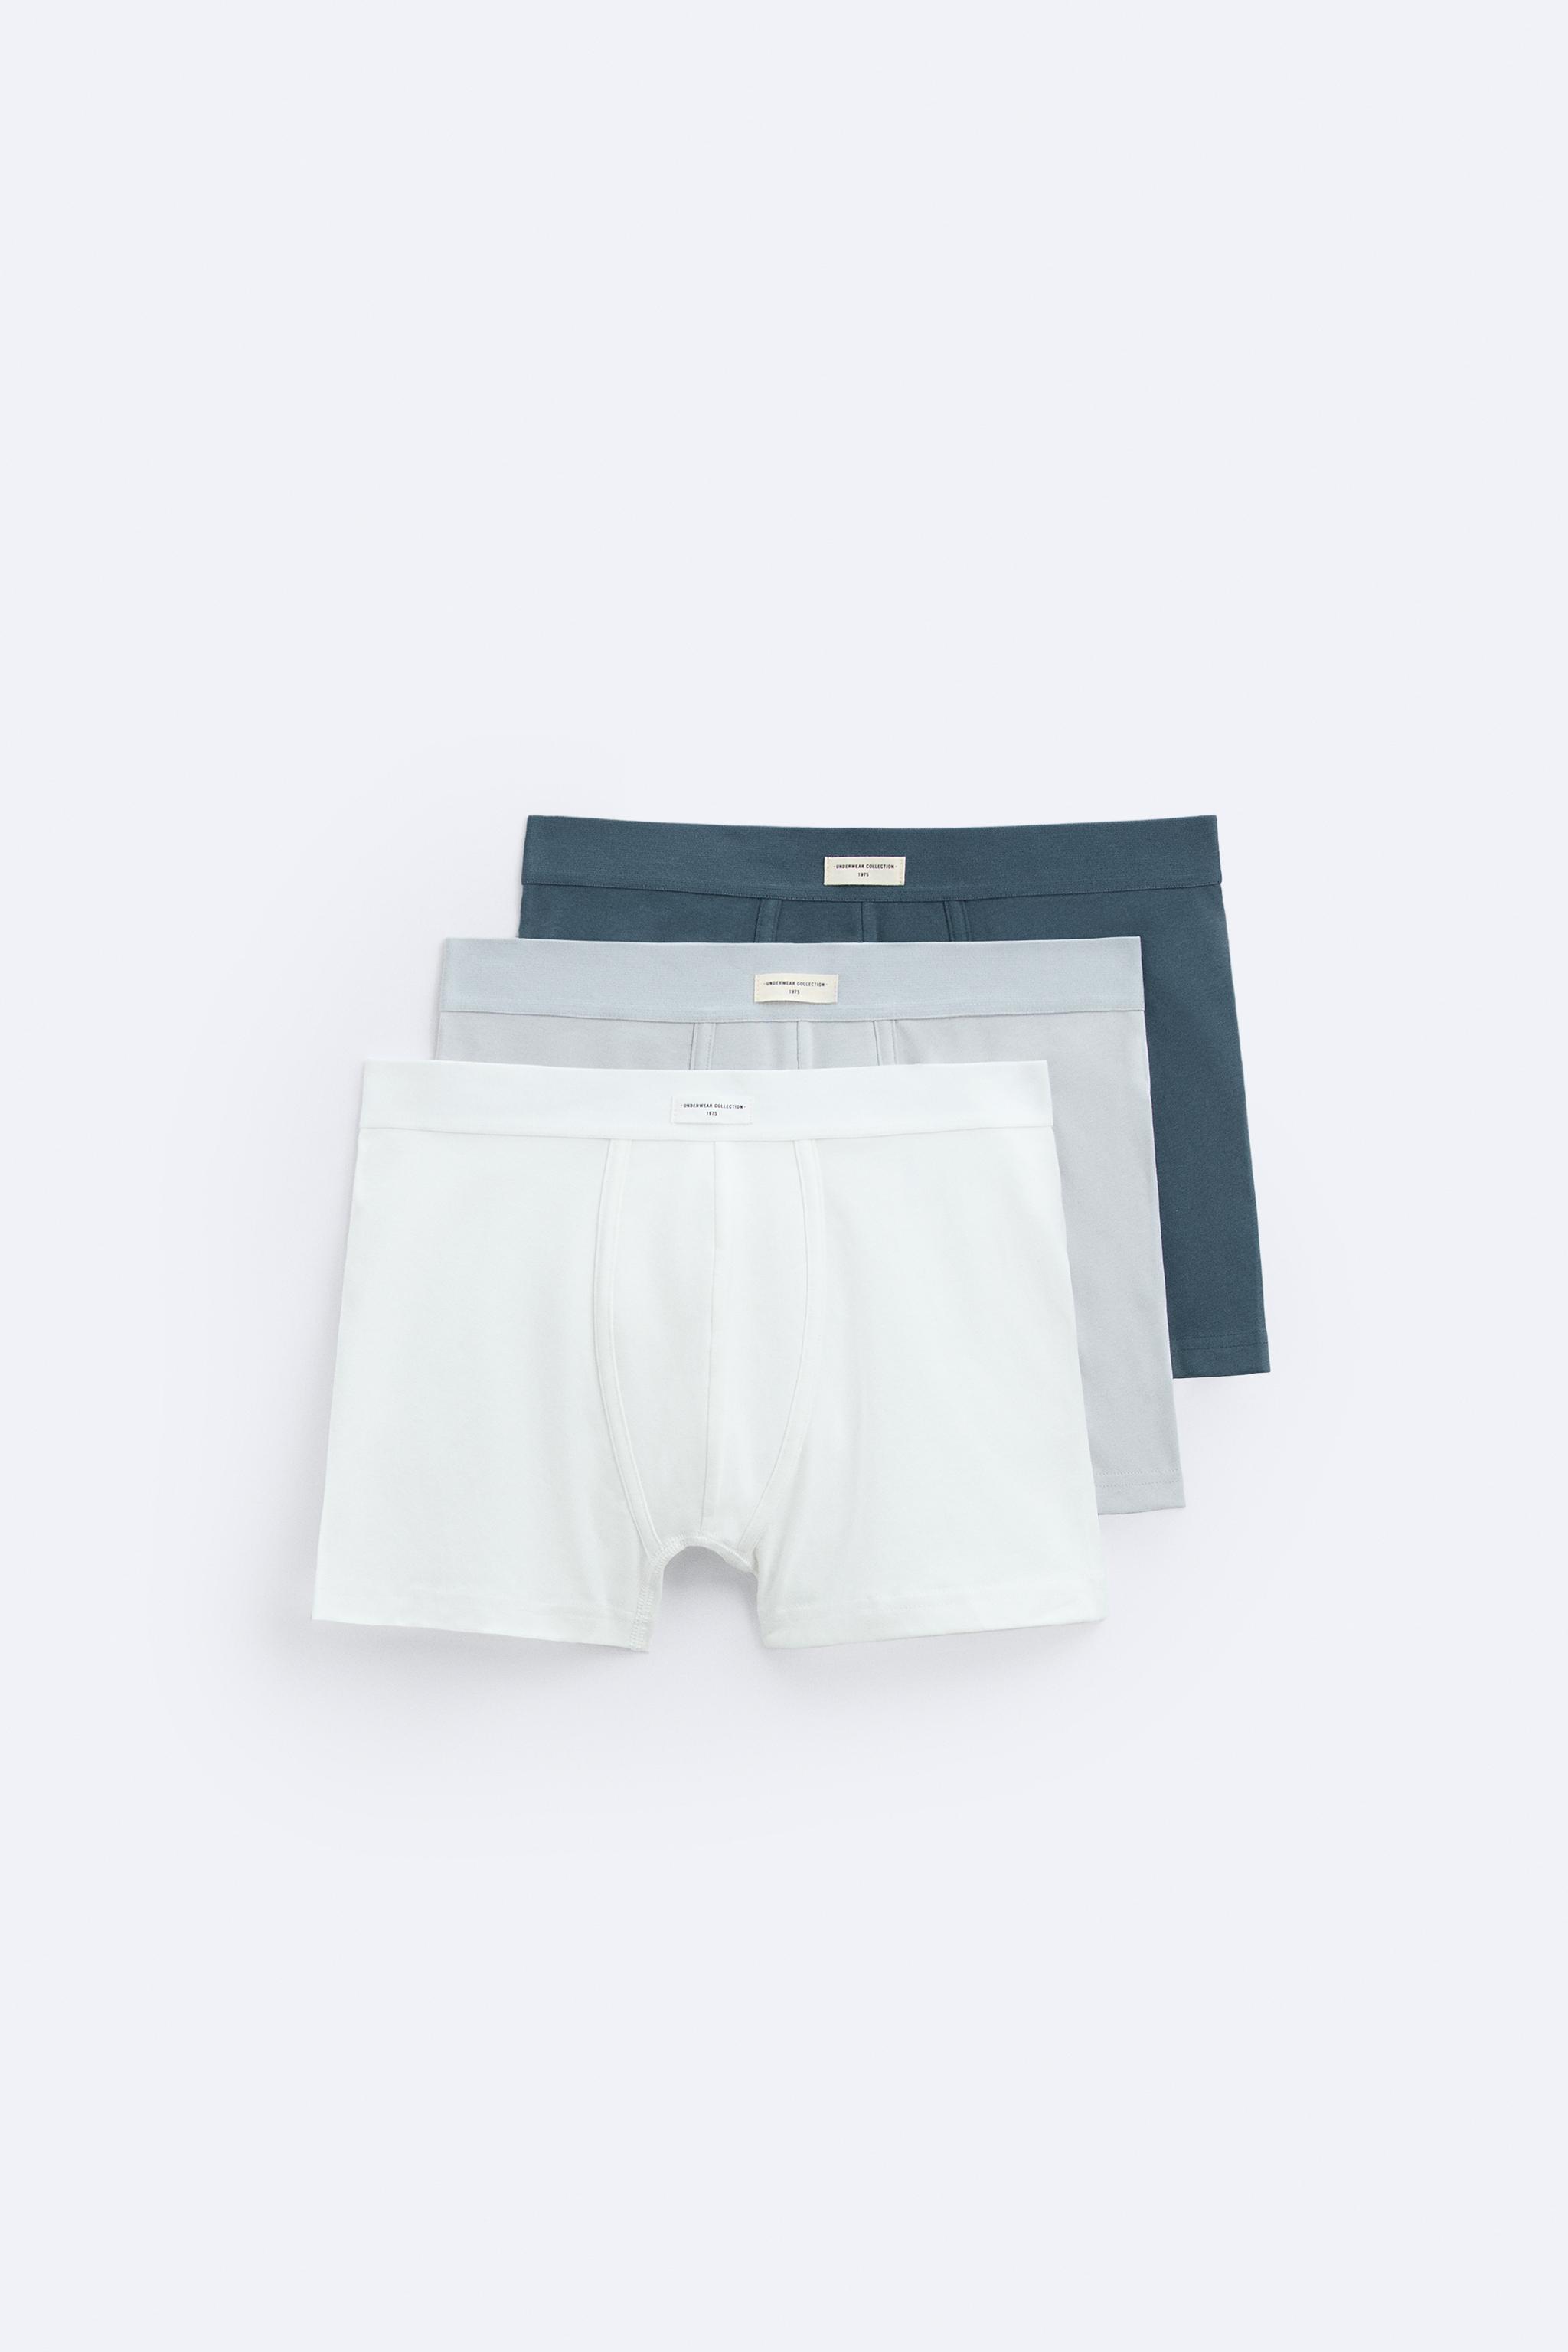 May Pen Men's Clothing Store on Instagram: Zara Boxers Available